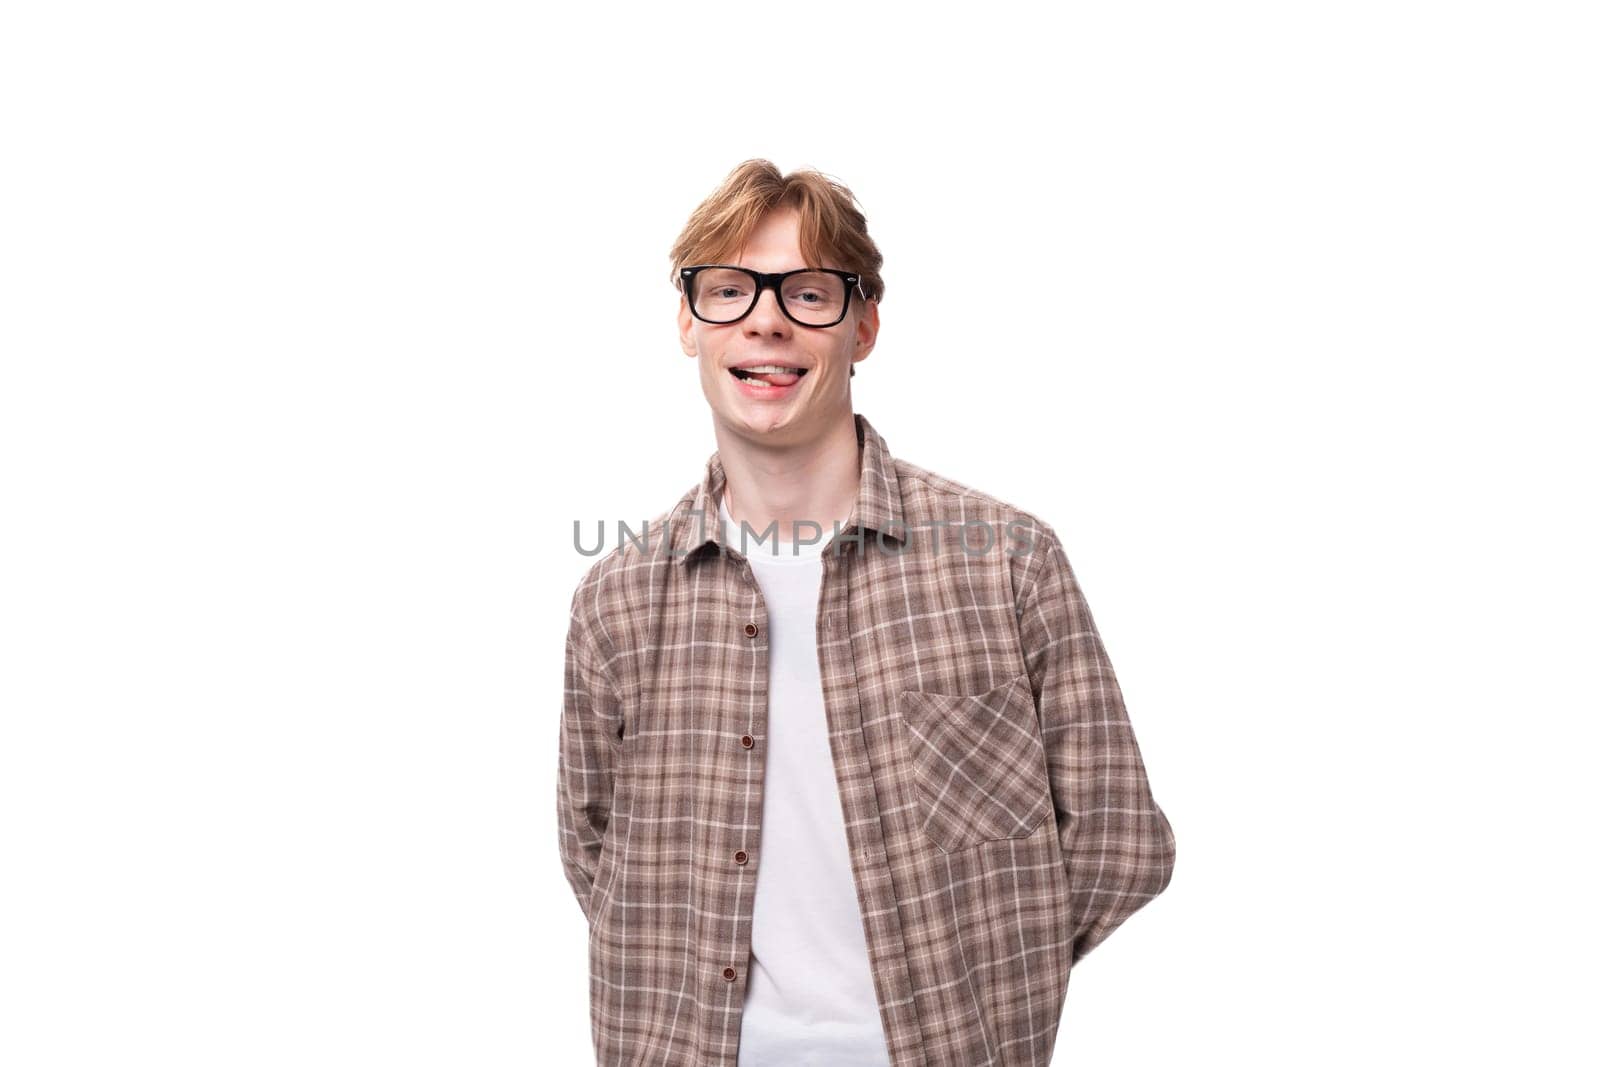 a young smiling man with red golden hair in glasses and a shirt stands alone on a white background.